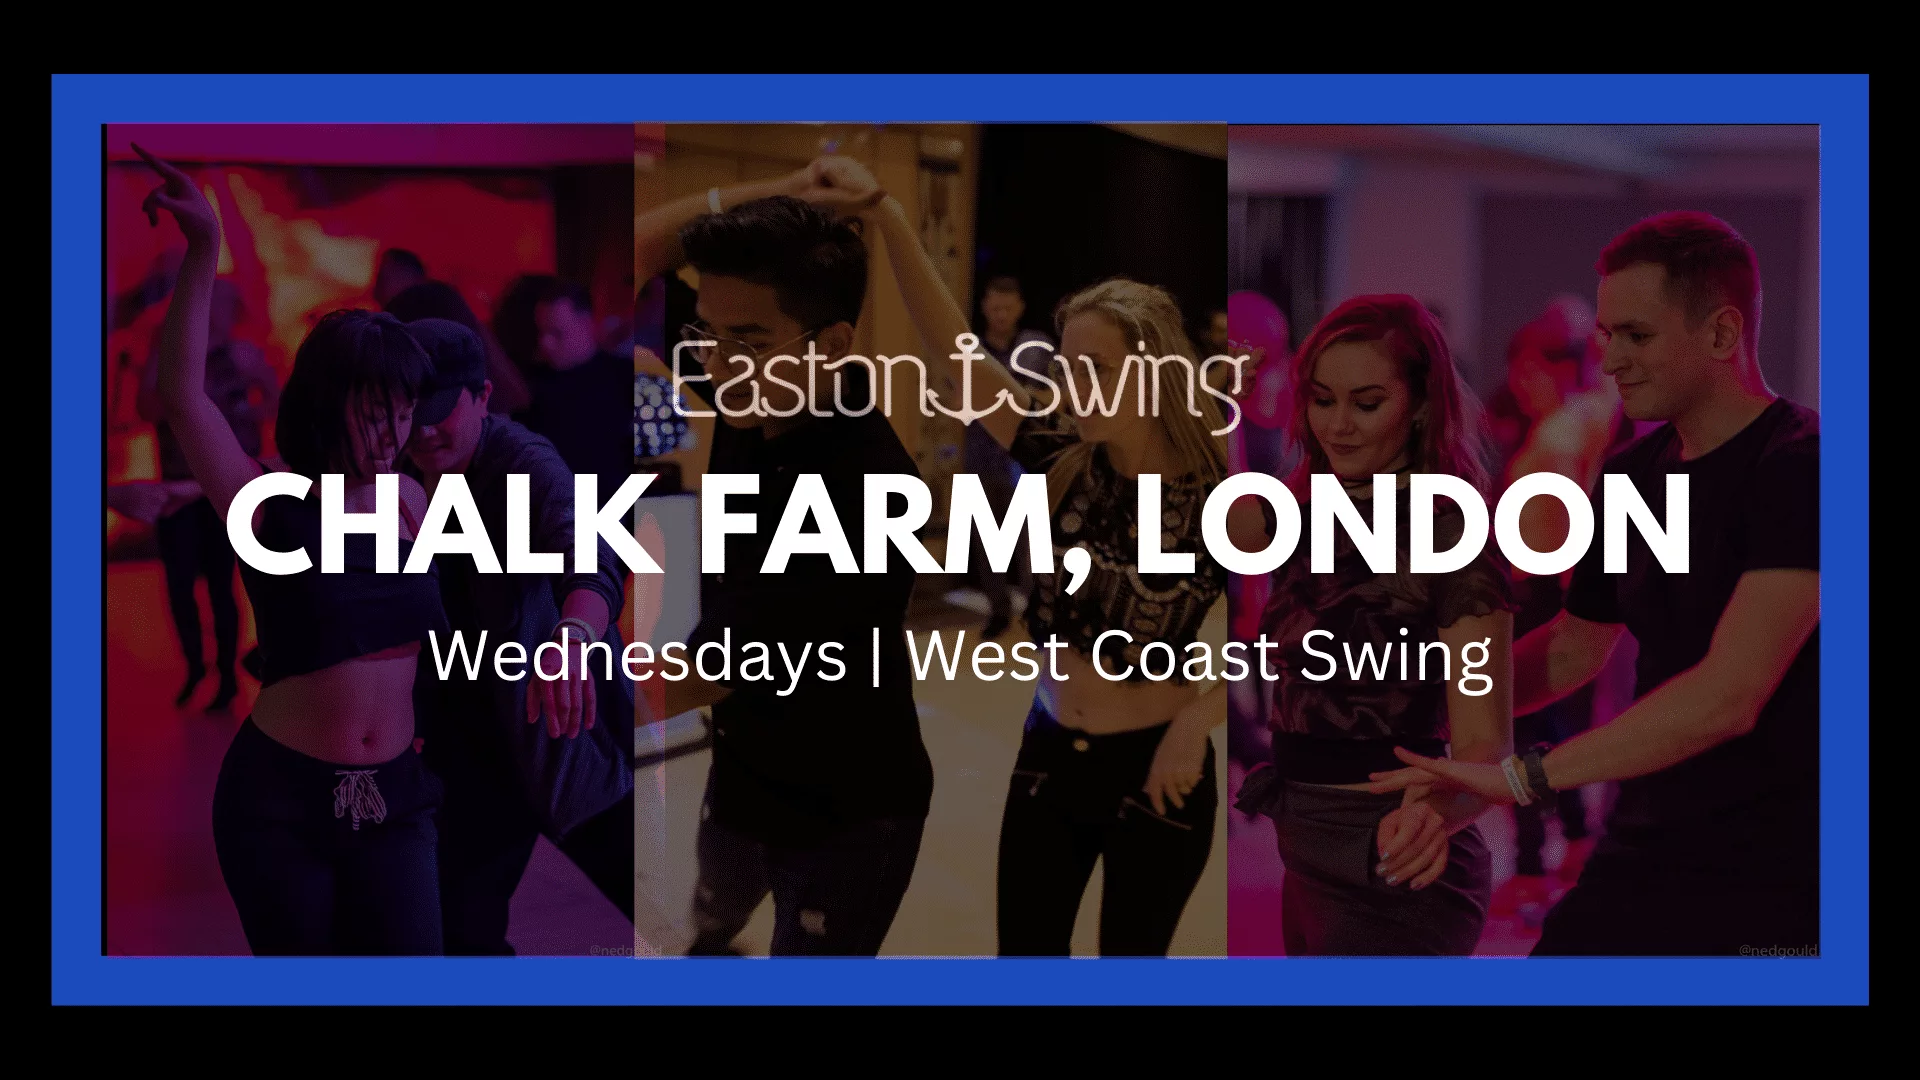 West Coast Swing London, Chalk Farm, people dancing with white emboldened text in s blue frame